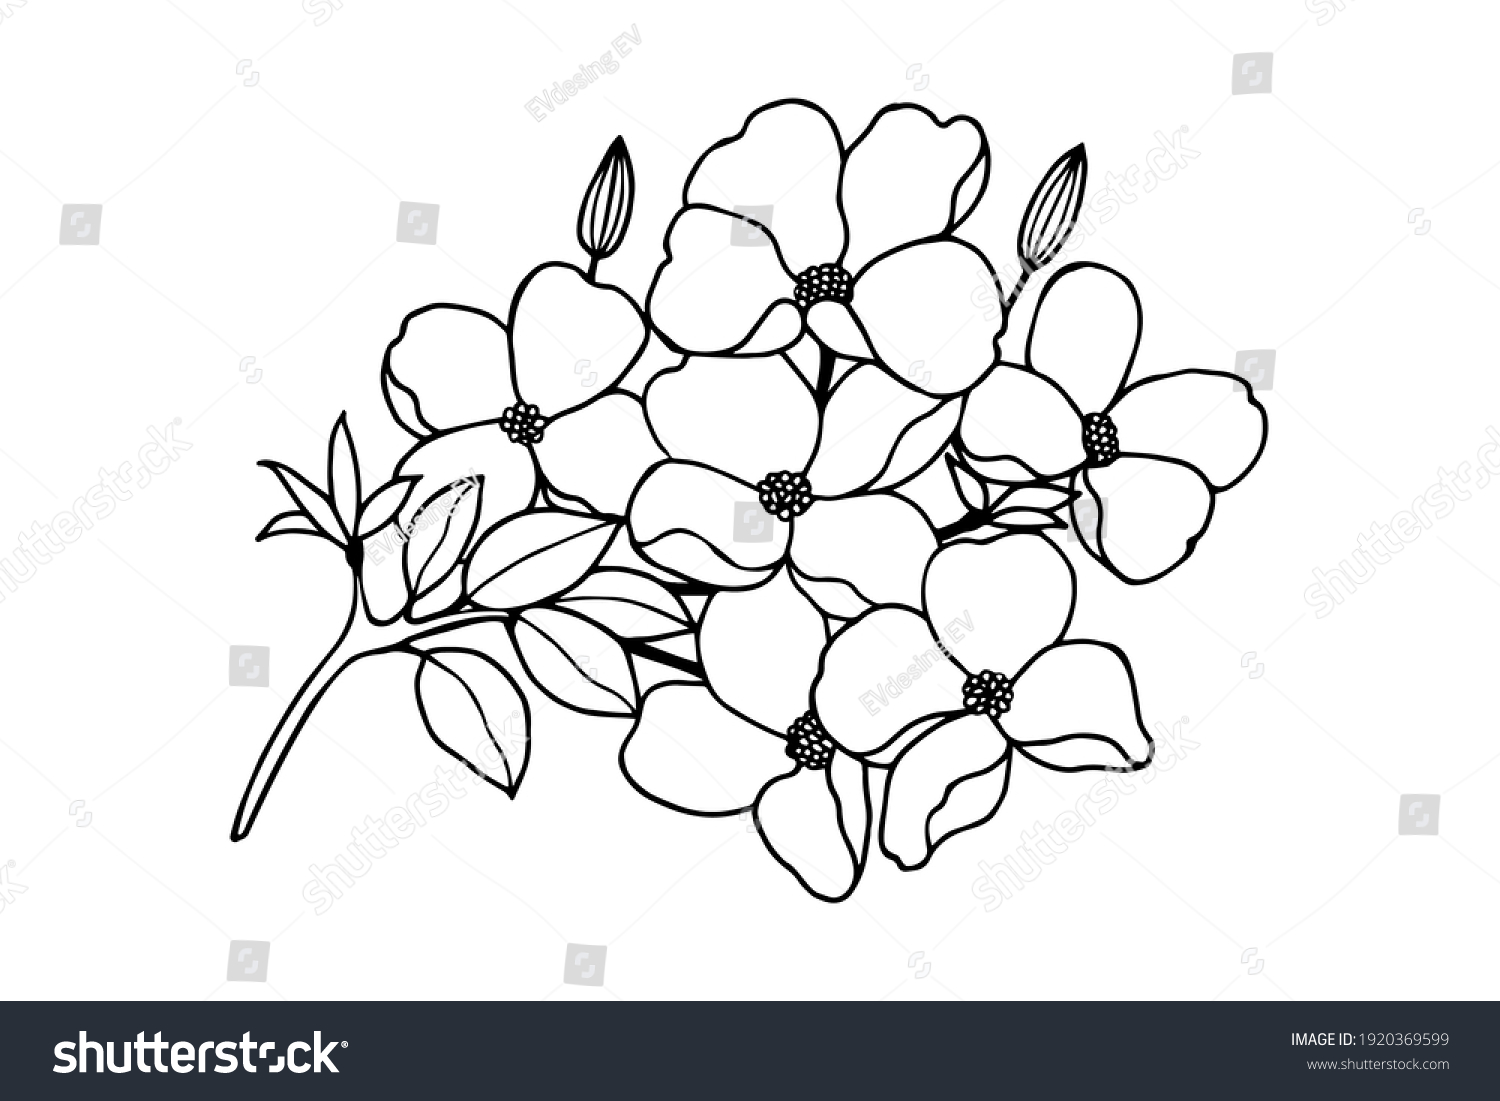 SVG of Branch with flowers. Dogwood. Vector stock illustration eps10. Isolate on white background, outline, hand drawing. svg